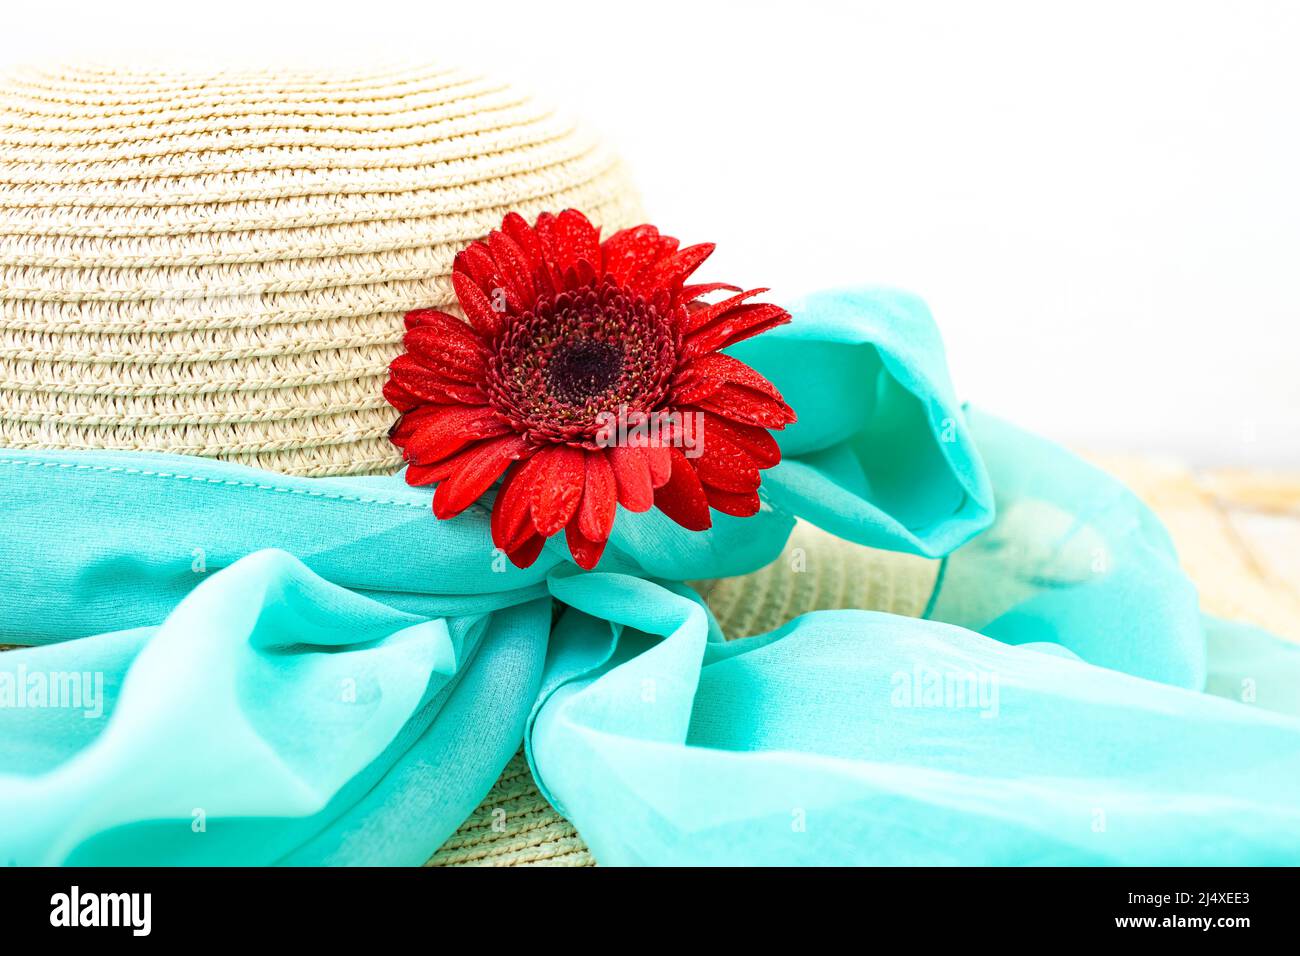 Red gerbera daisy flower on a straw hat tied with a blue scarf, Summer , beach, romantic  background Stock Photo